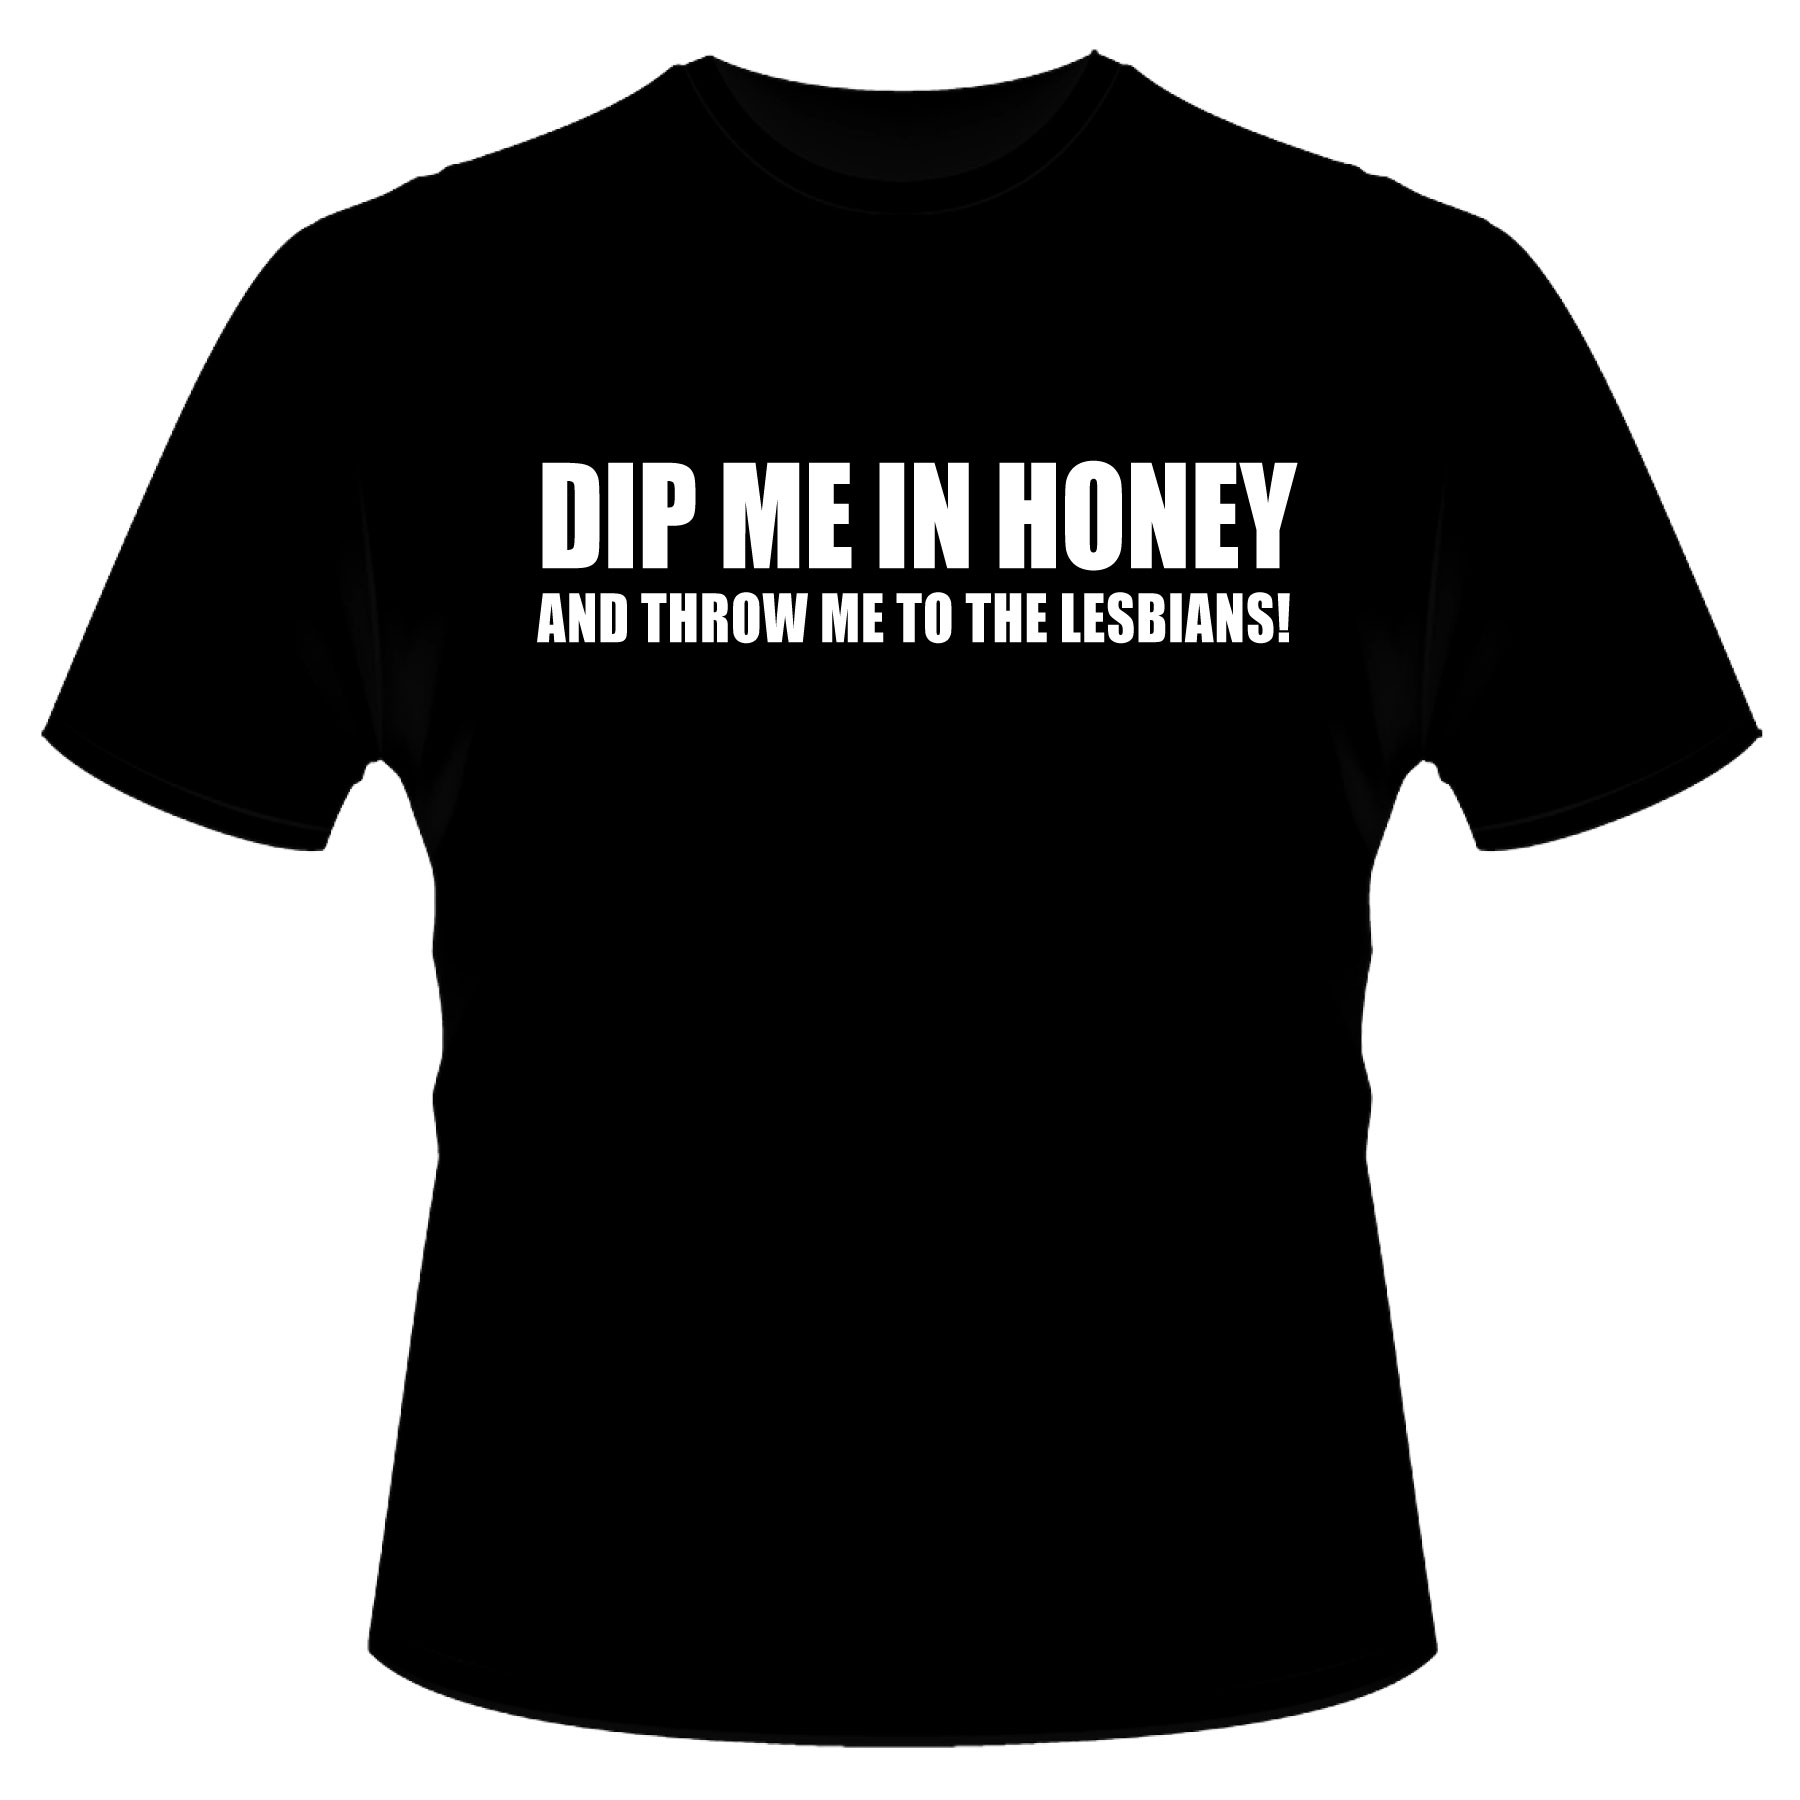 Dip Me In Honey And Throw Me To The Lesbians Funny Biker Tee S 5xl Ebay